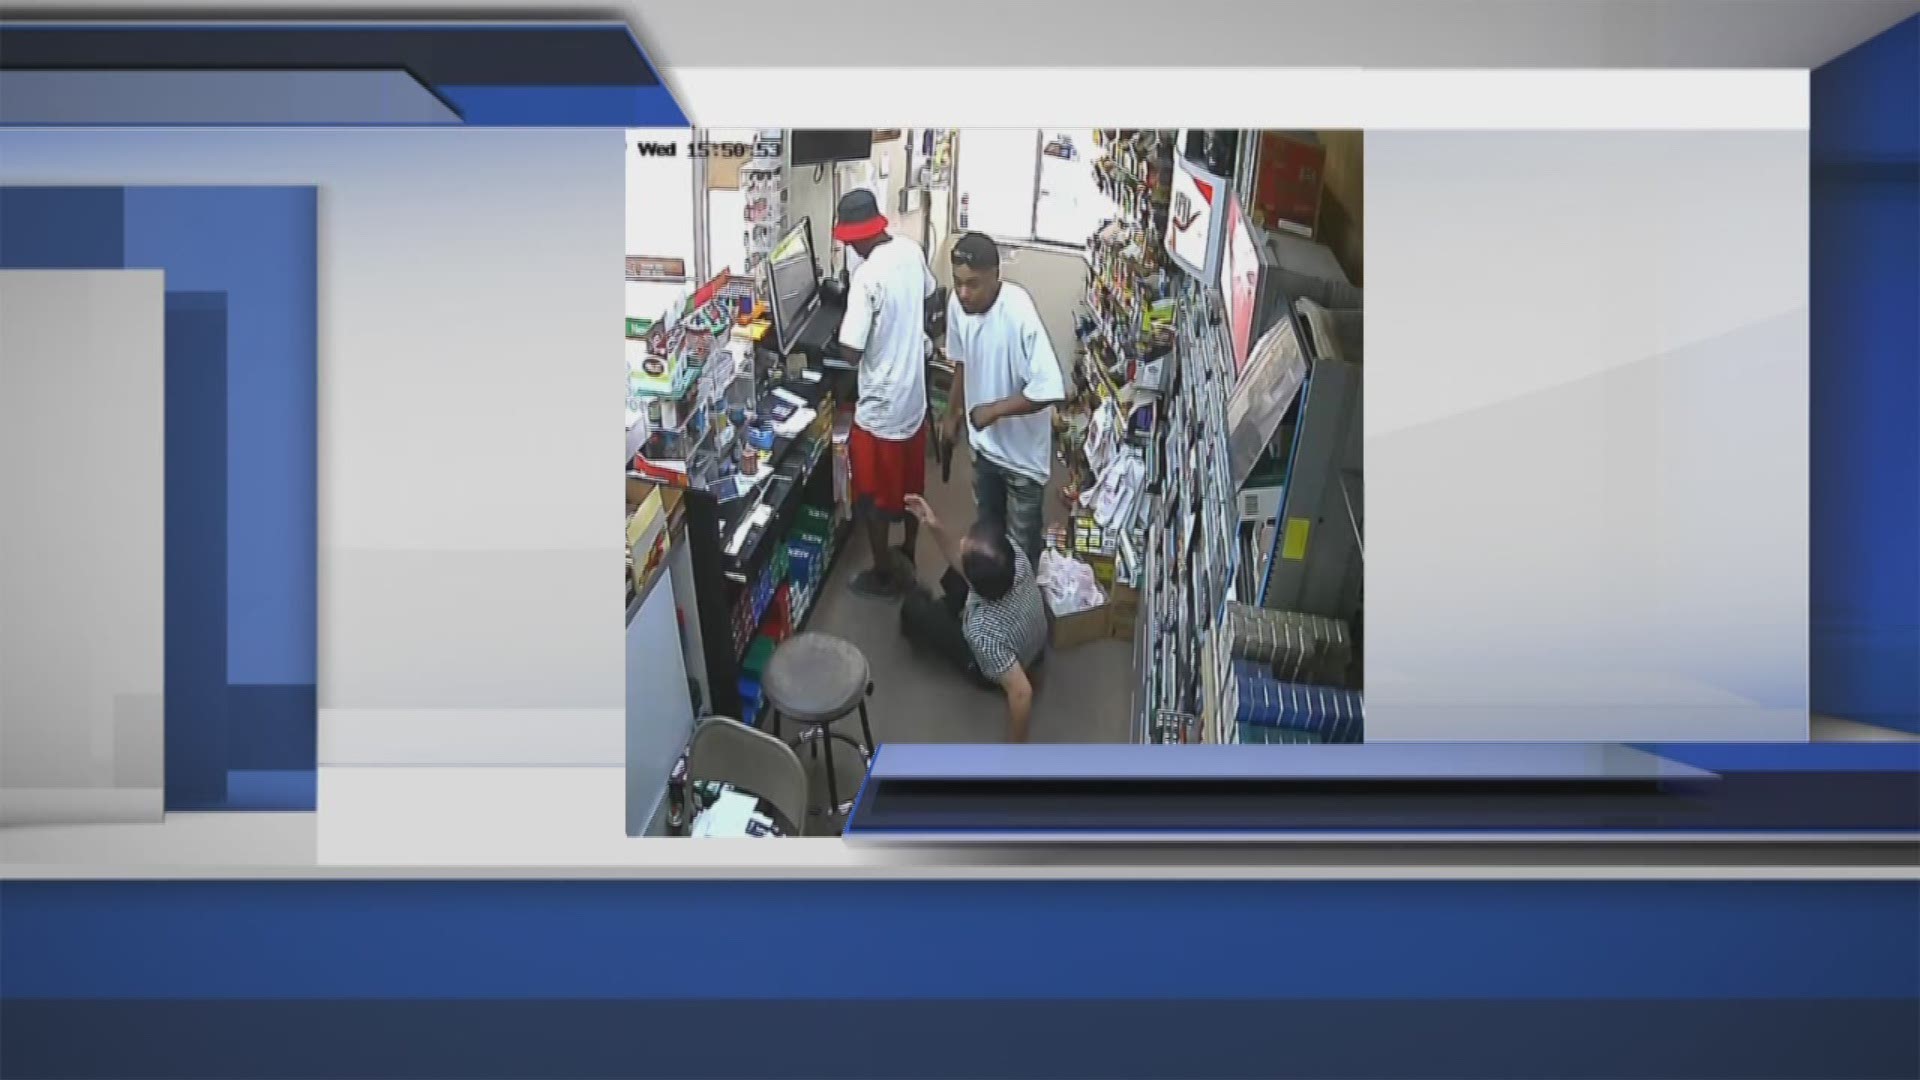 Police are looking for two suspects that robbed the A-Z smoke shop on College street. While the clerk was helping the first man that entered the shop, a second man came up, pointed a pistol at the employee and demanded money. If you have any information, 